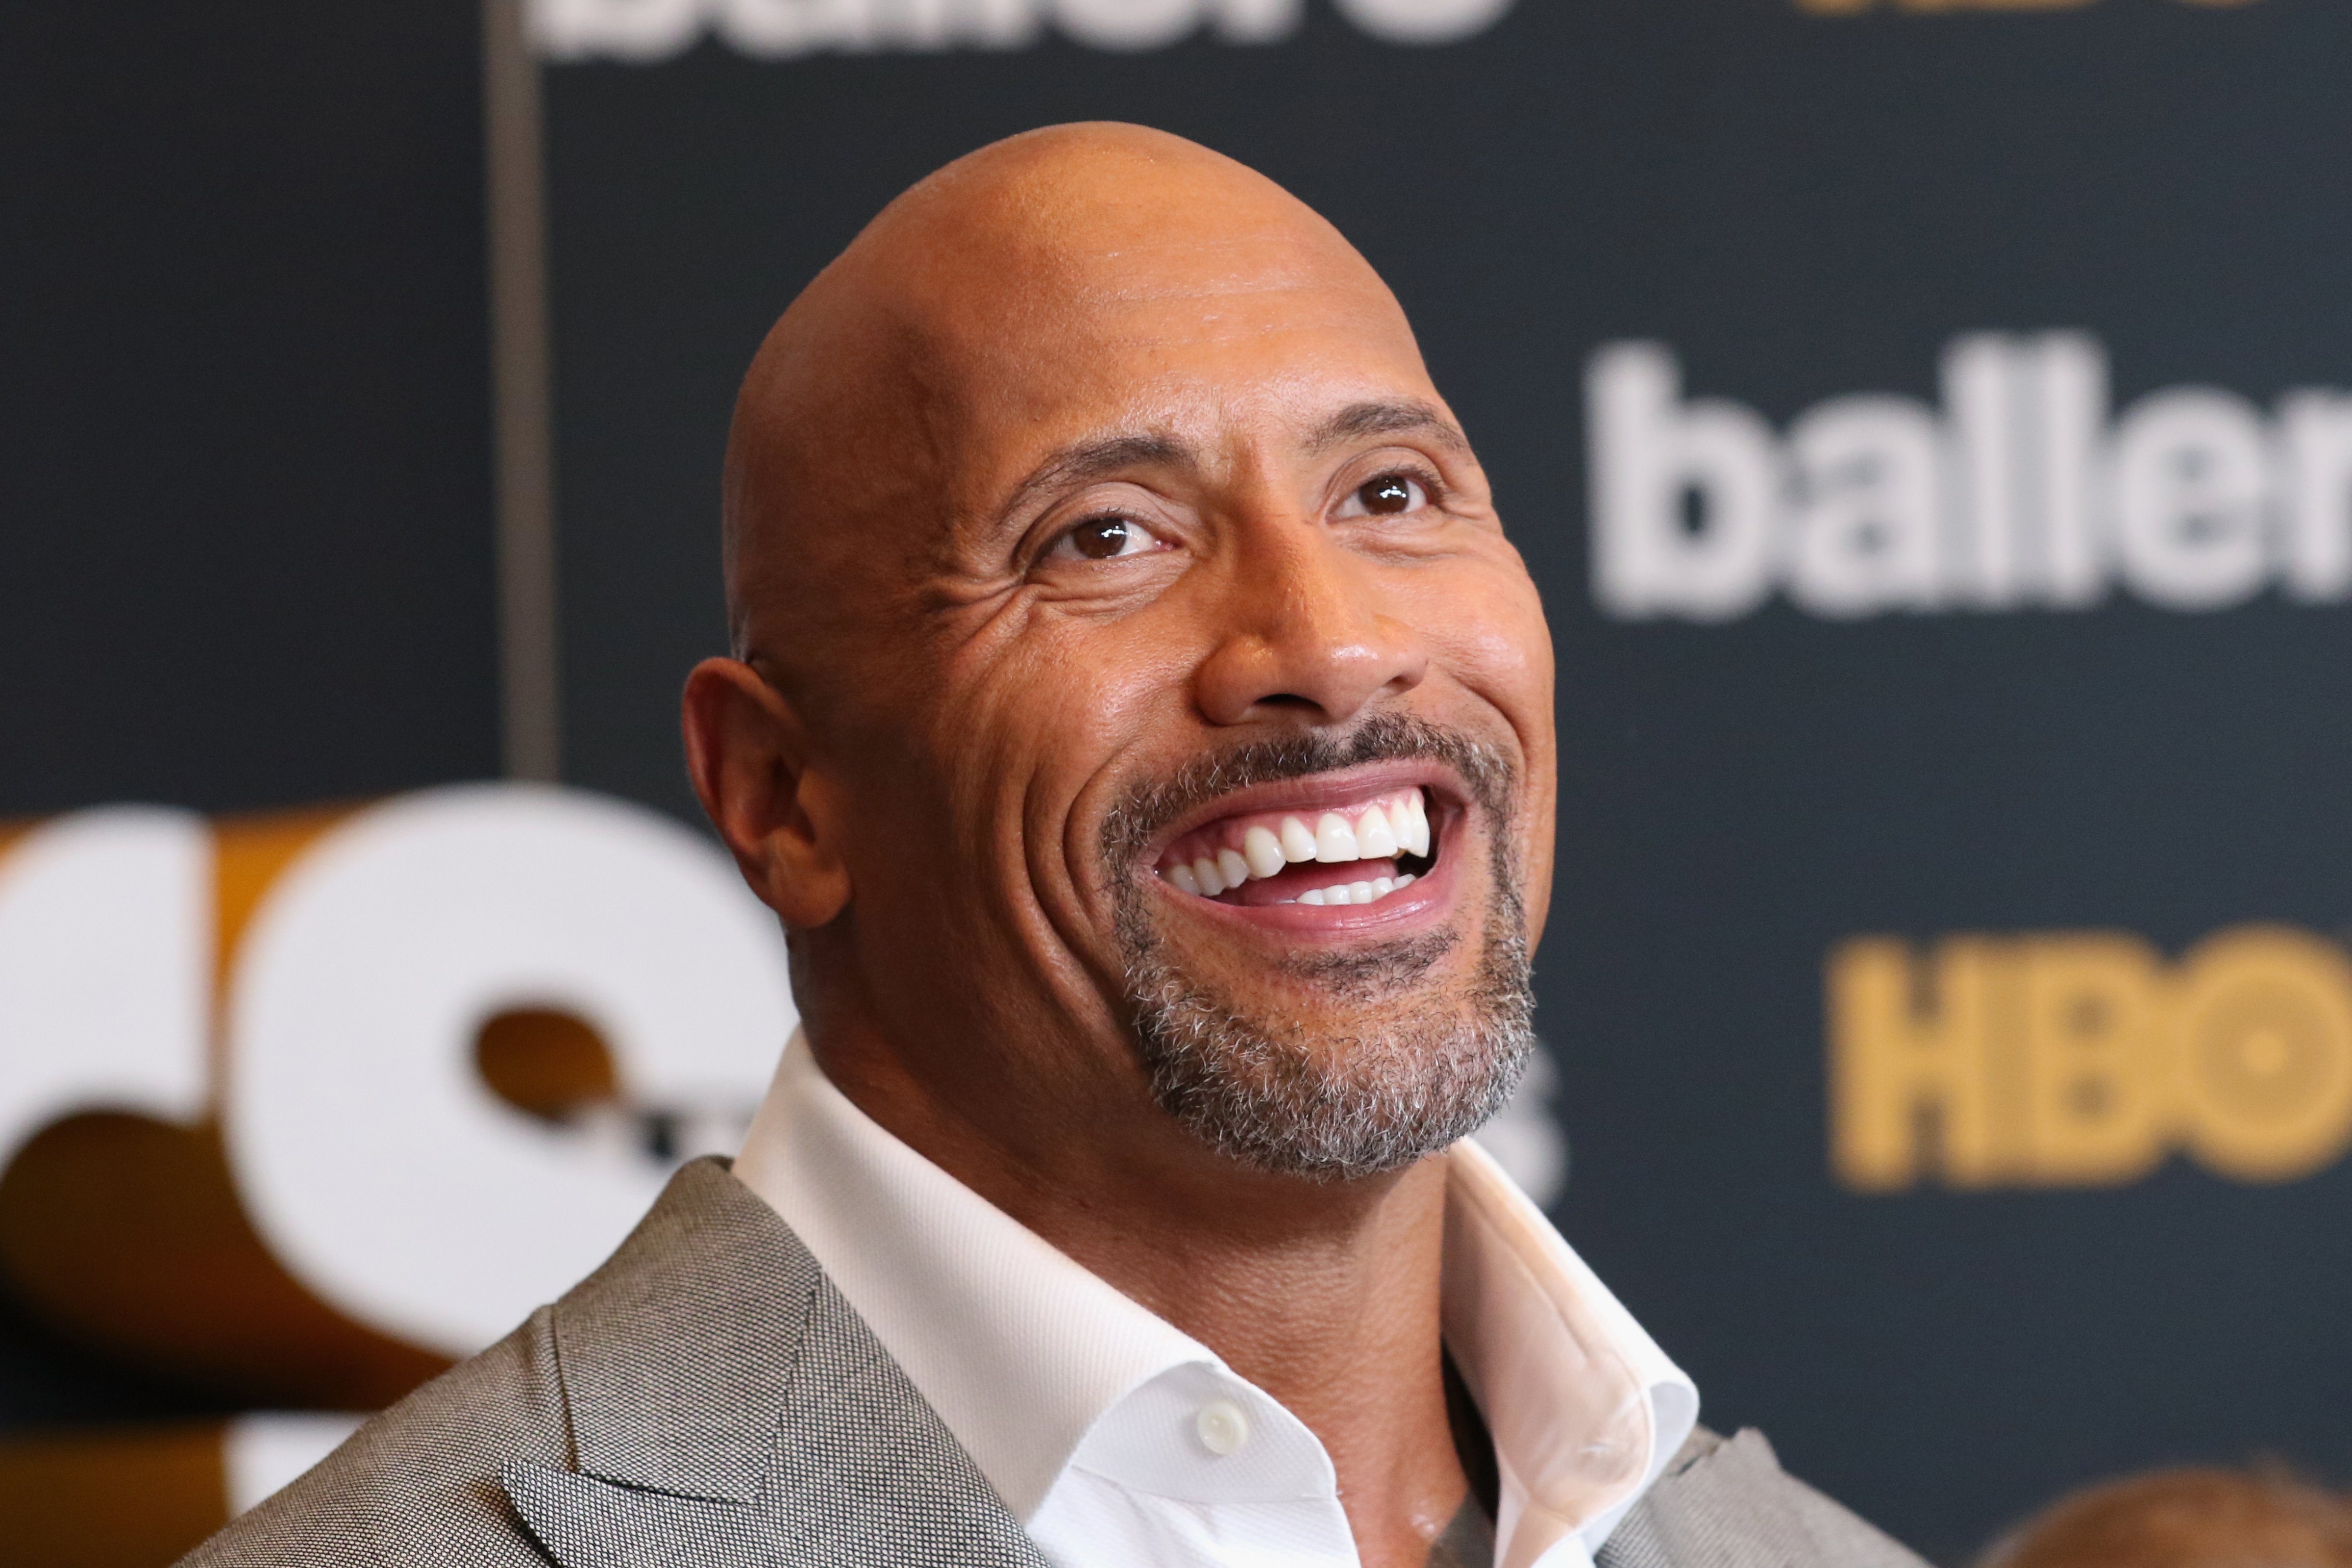 MIAMI BEACH, FL - JULY 14:  Dwayne Johnson attends the HBO "Ballers" Season 2 Red Carpet Premiere and Reception. (Aaron Davidson—Getty Images)